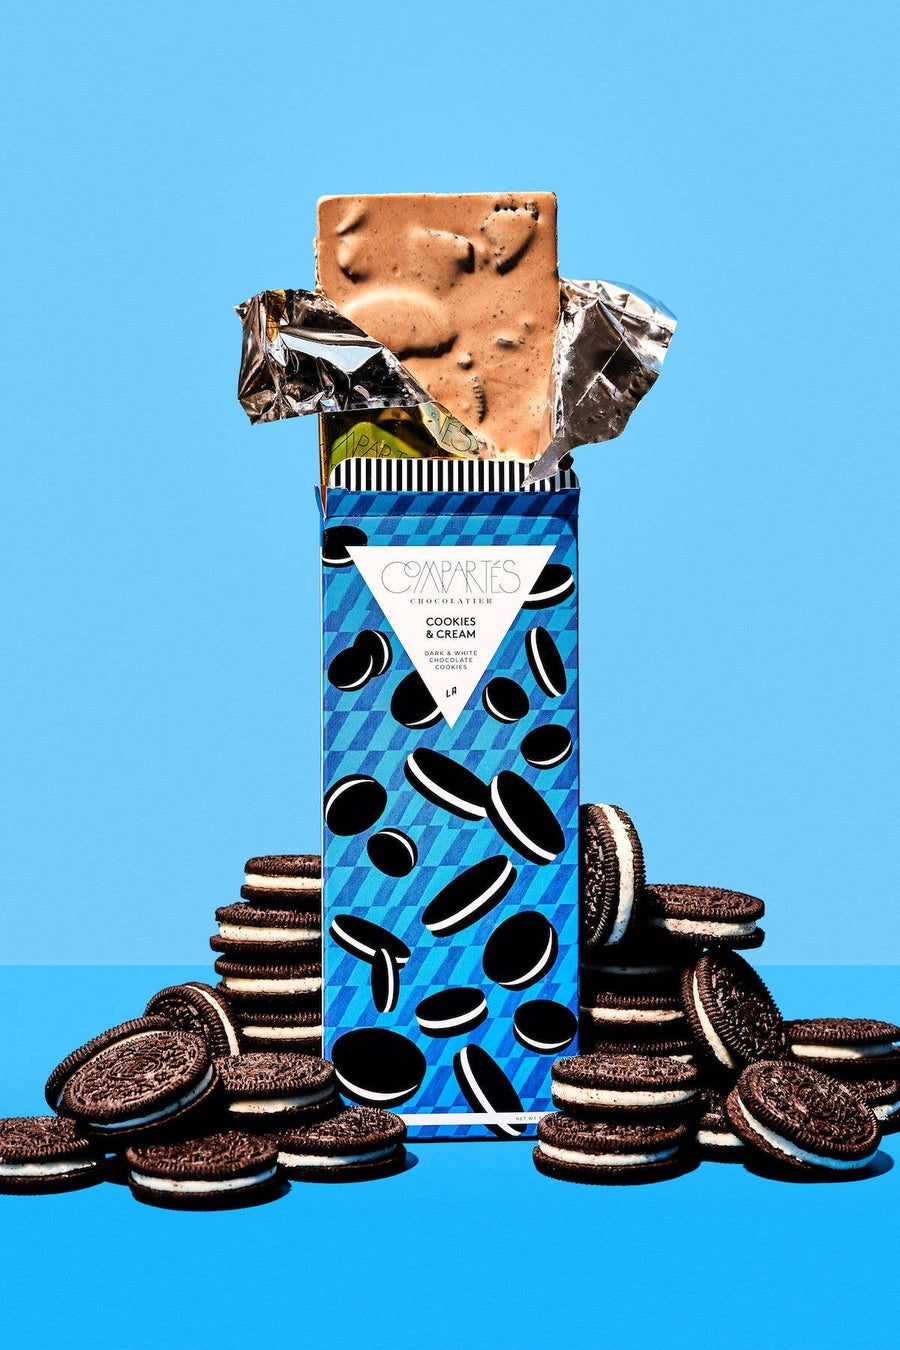 Cookies and Cream Oreo Cookie Chocolate Bar by Compartes Chocolate